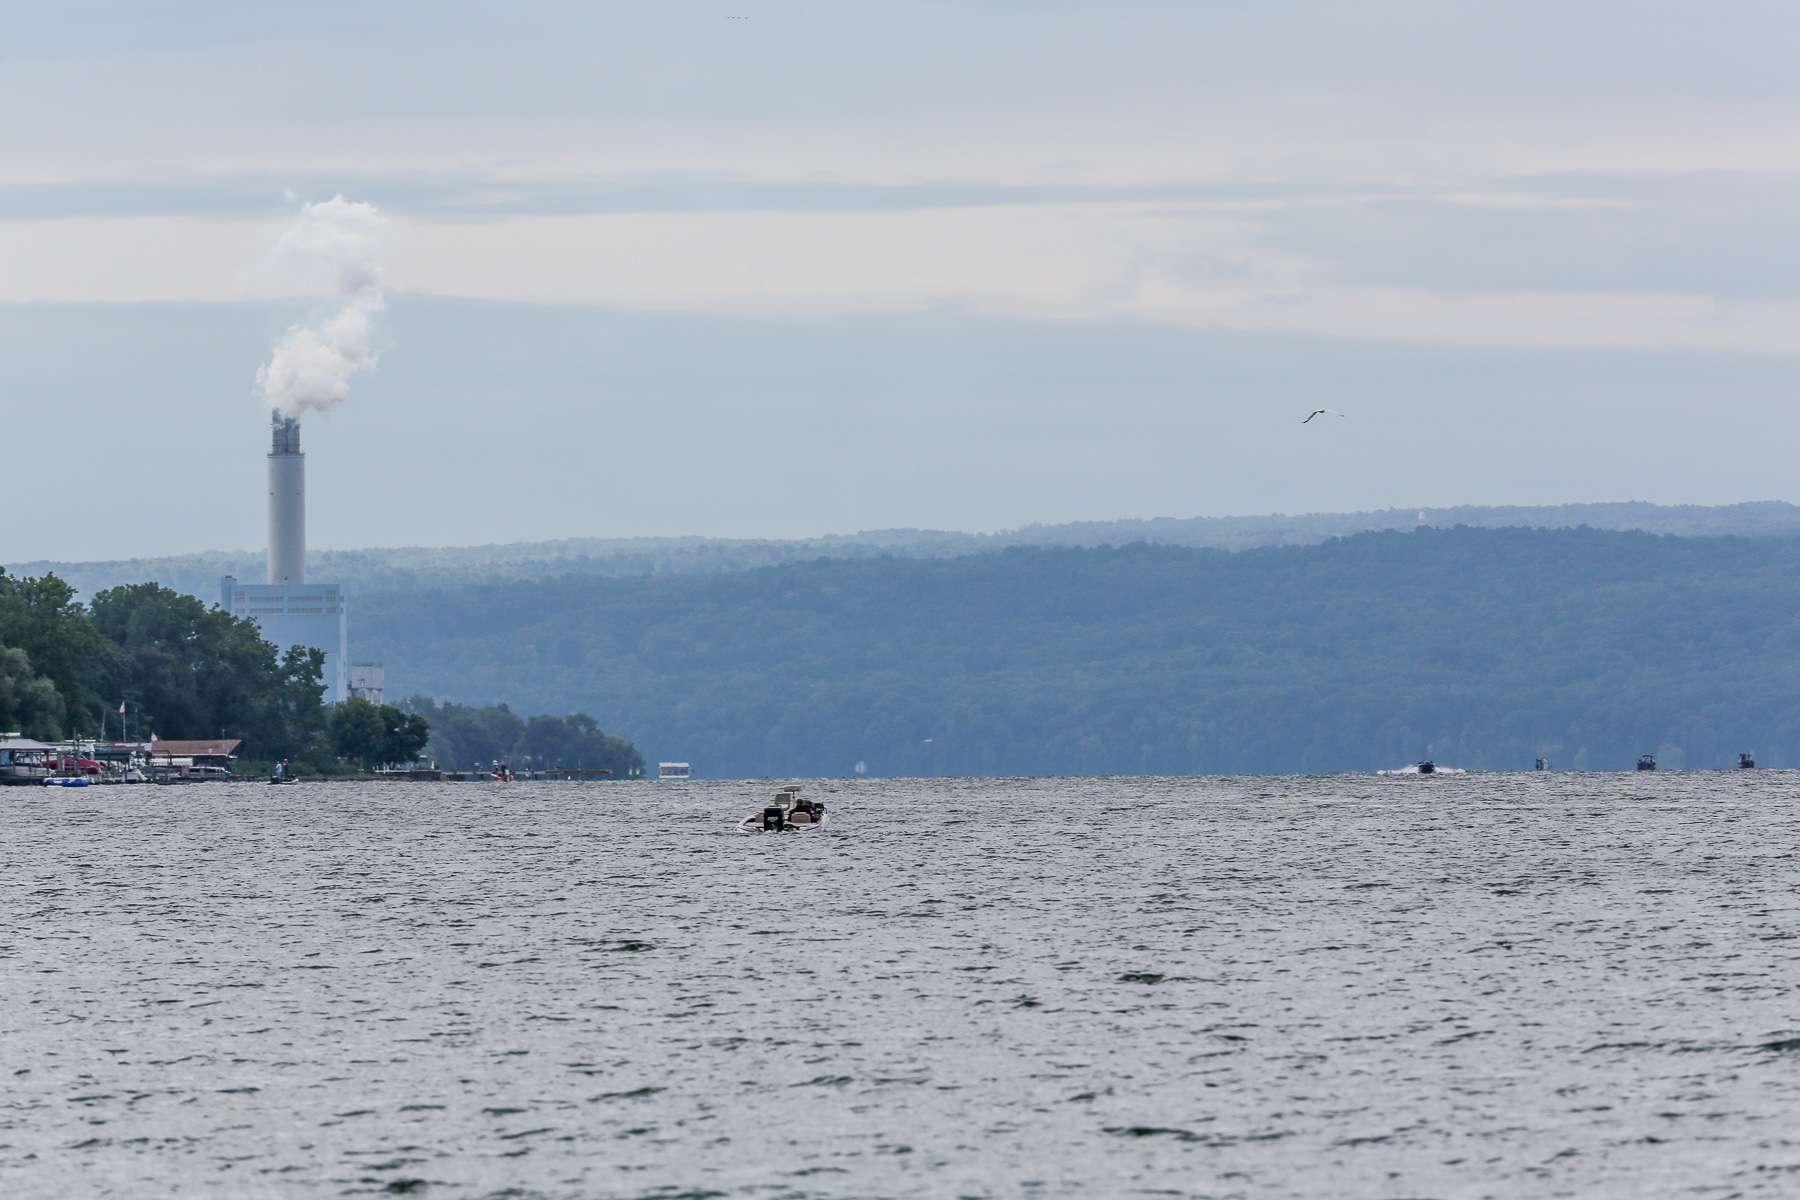 <h4>11. Cayuga Lake, New York</h4>
  [38 miles long, 3 1/2 miles wide] A Bassmaster Elite Series tournament here in June 2016 demonstrated that Cayuga has plenty of heavyweight smallmouth and largemouth bass. VanDam won that four-day event with 71-13. His catch consisted mainly of smallmouth. His win proves that the 85-0, four-day catch of largemouth by Greg Hackney during a 2014 Elite Series event here was no fluke.
